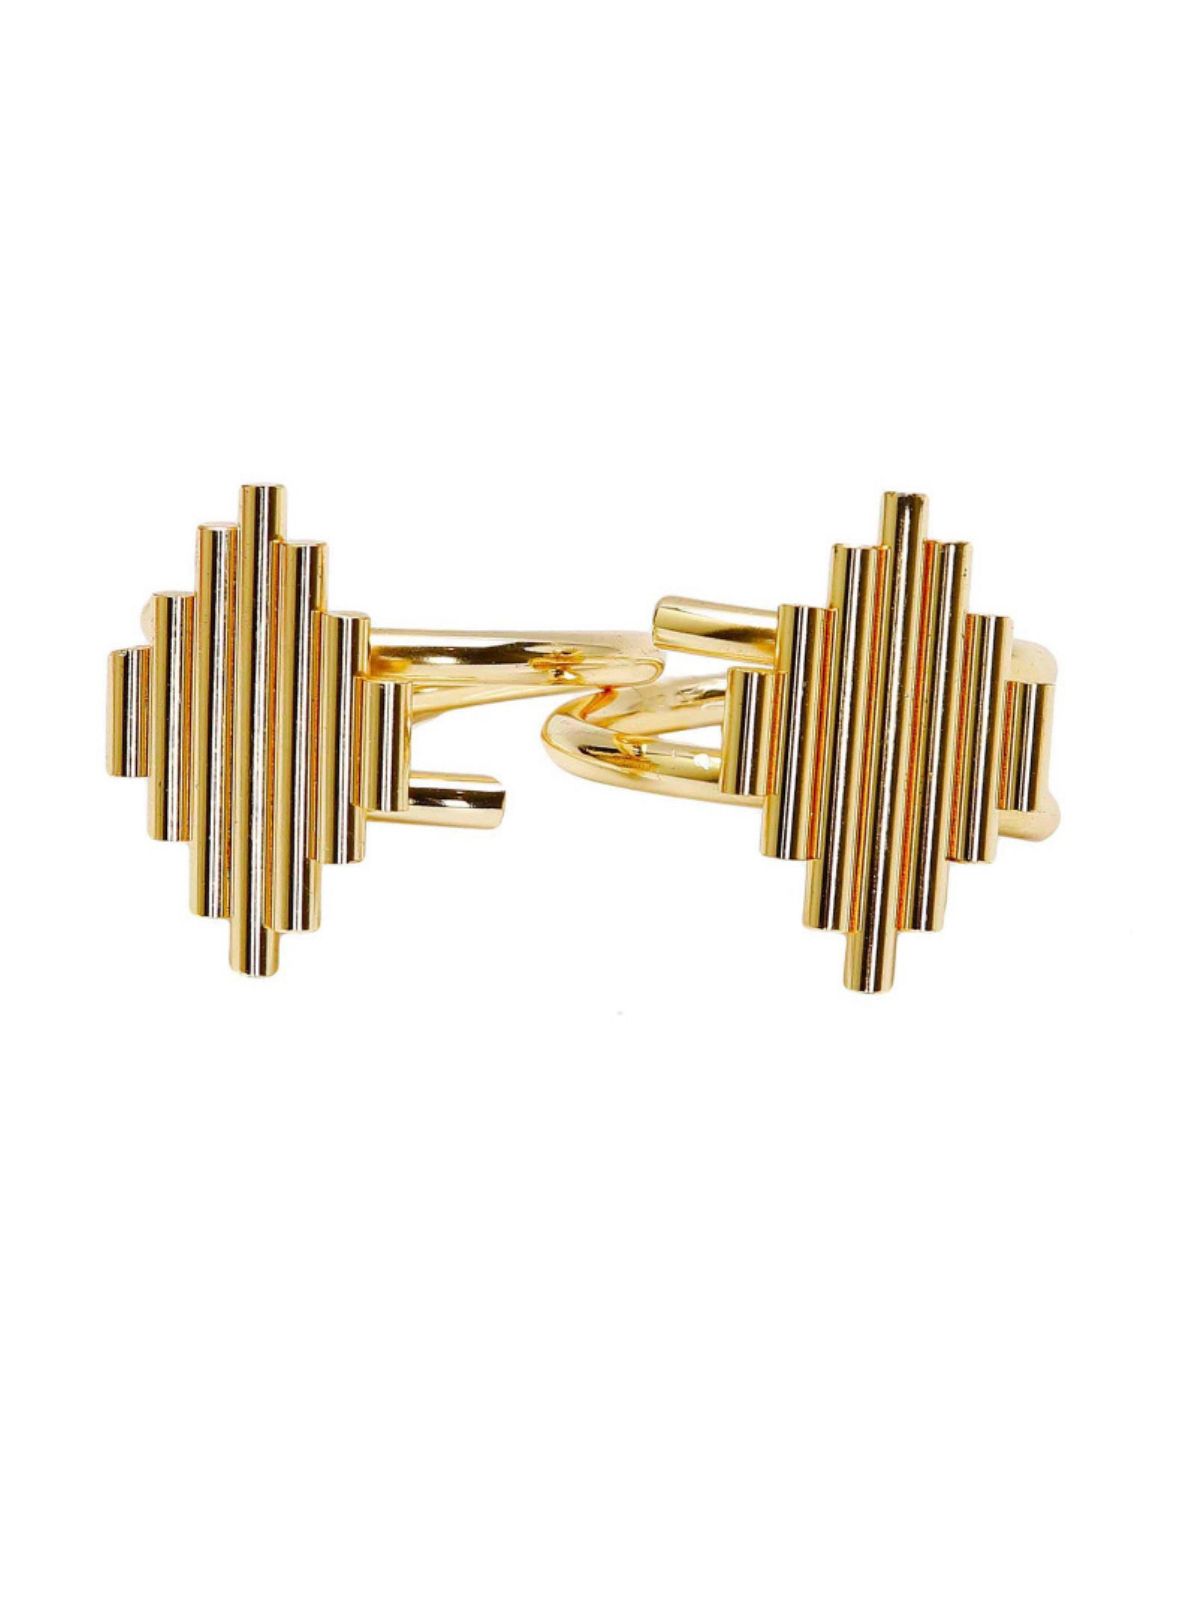 Set of 2 Luxury Stainless Steel Napkin Rings With Gold Diamond Design - KYA Home Decor.